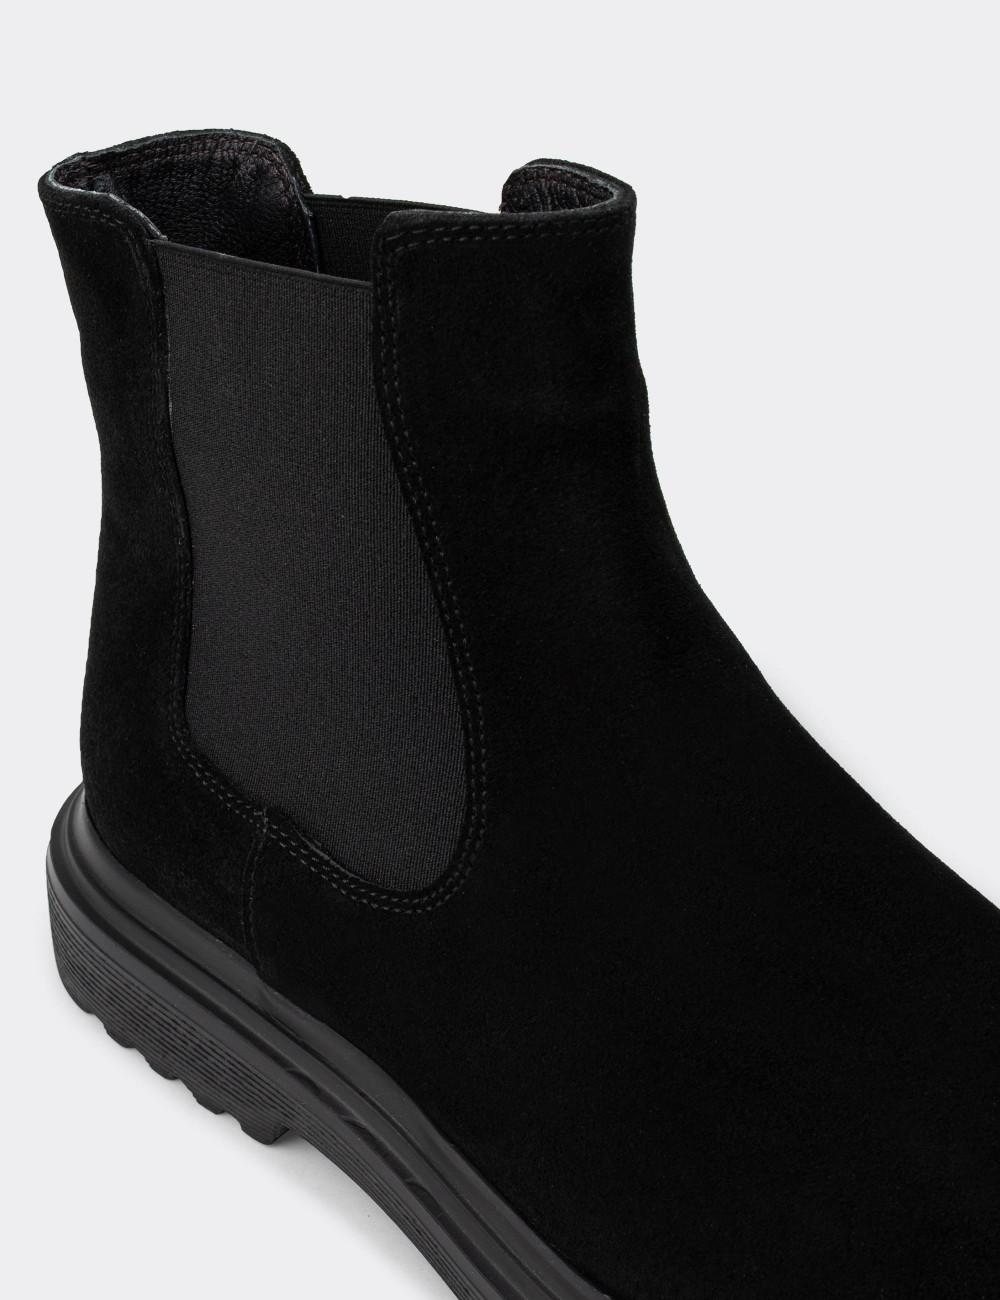 Black Suede Leather Chelsea Boots - 01849MSYHE02